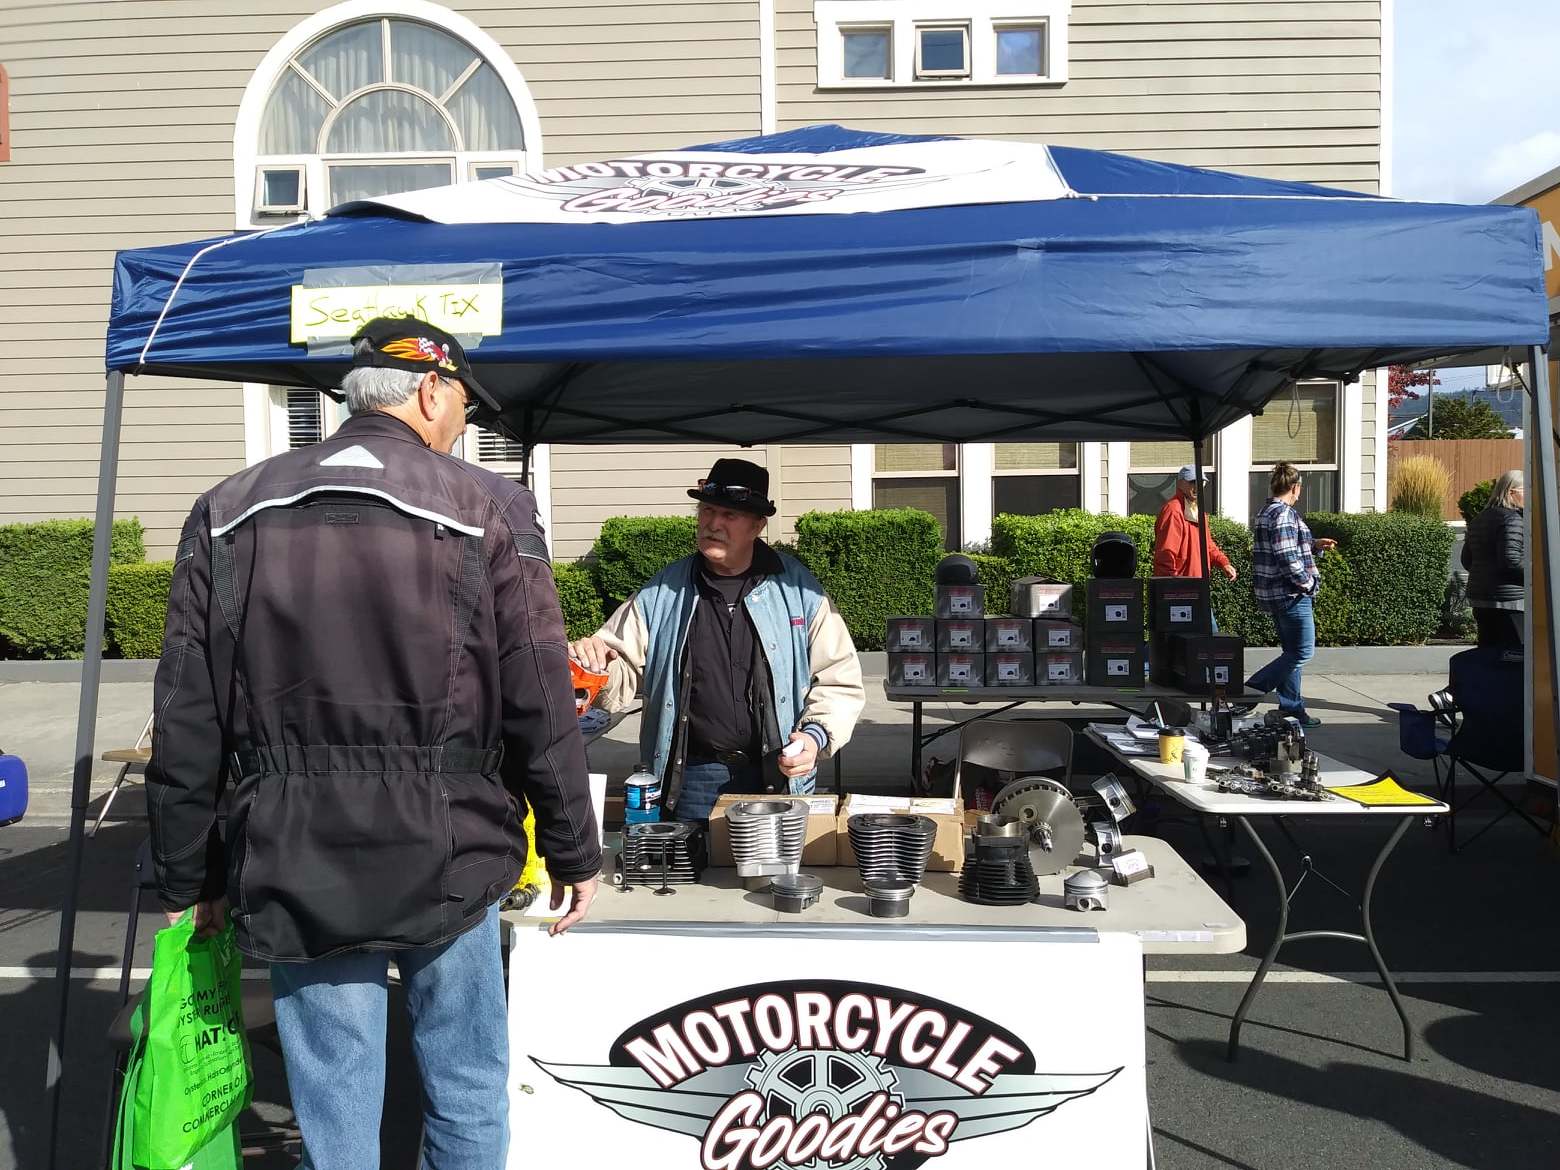 Our Vendor Booth at Oyster Run 2018